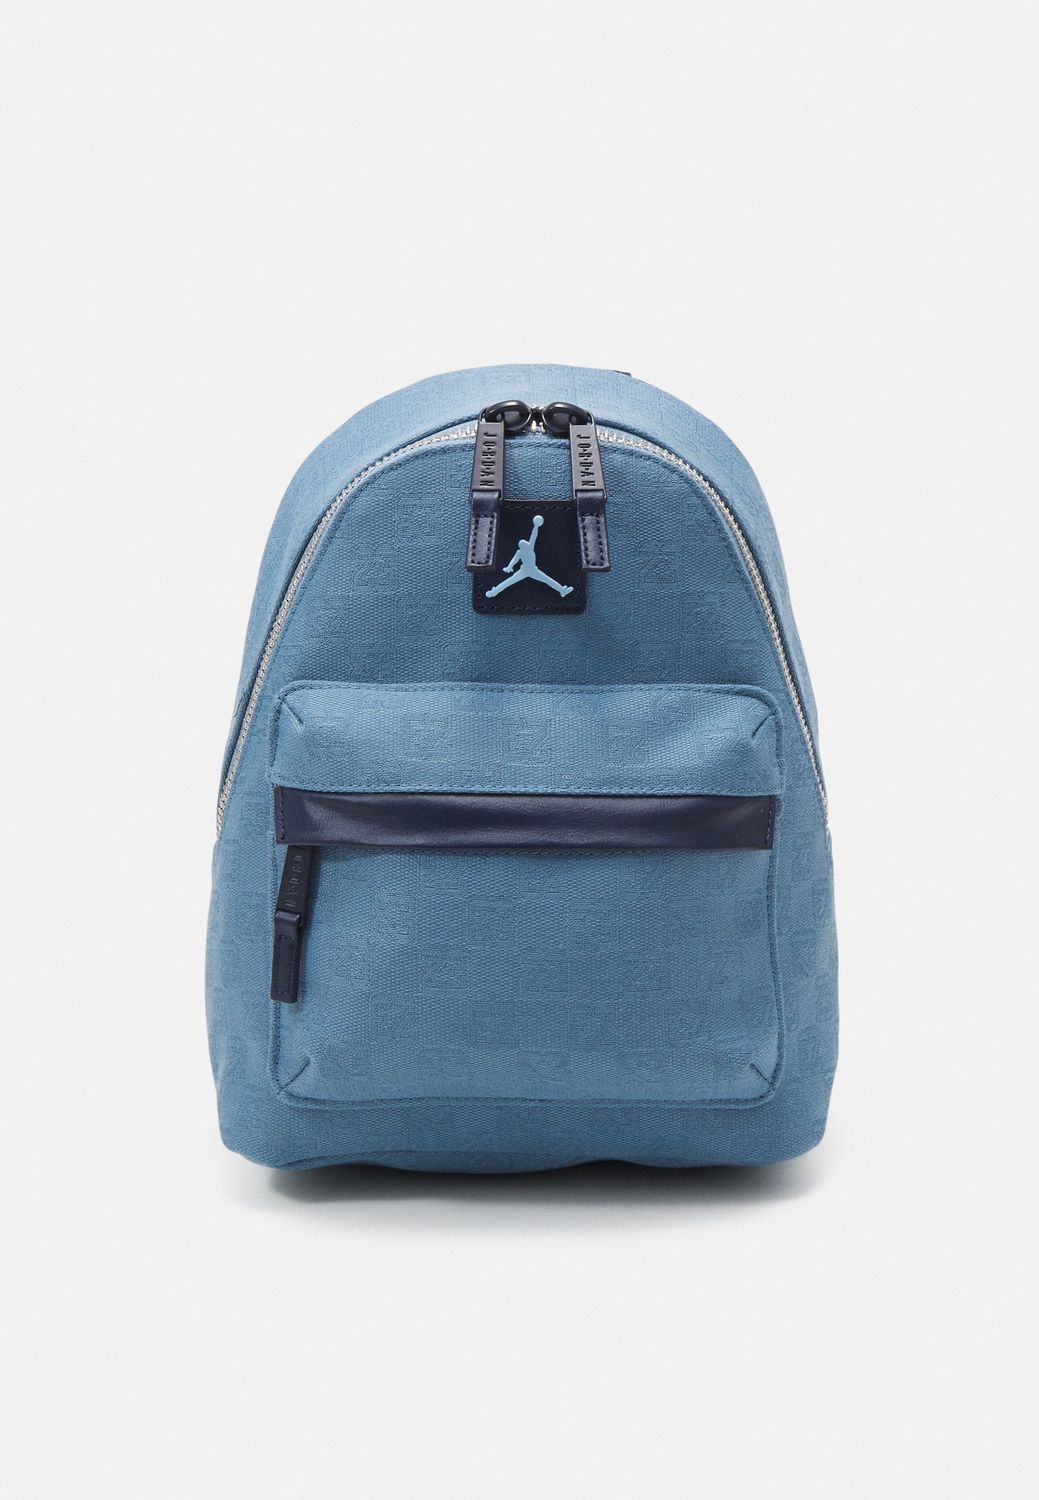 Limited Edition Jordan Monogram Backpack, Chambray, Brand new, sold out